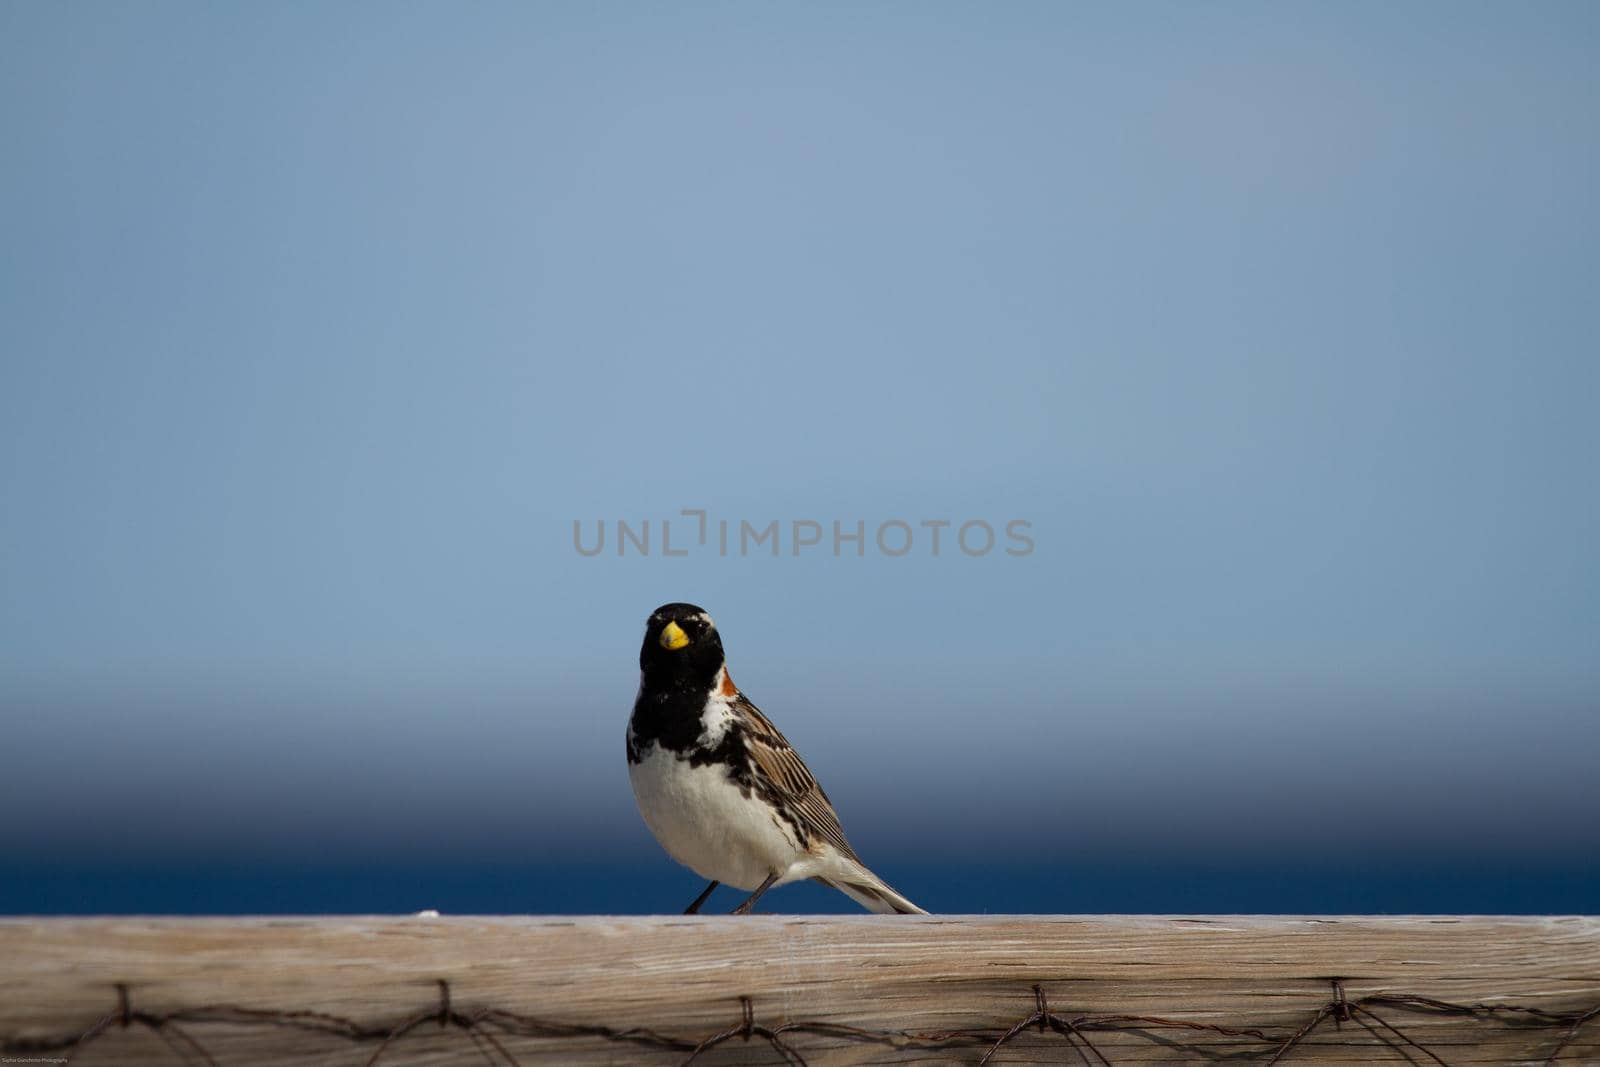 Lapland longspur bird standing on a post with blue skies in the background by Granchinho